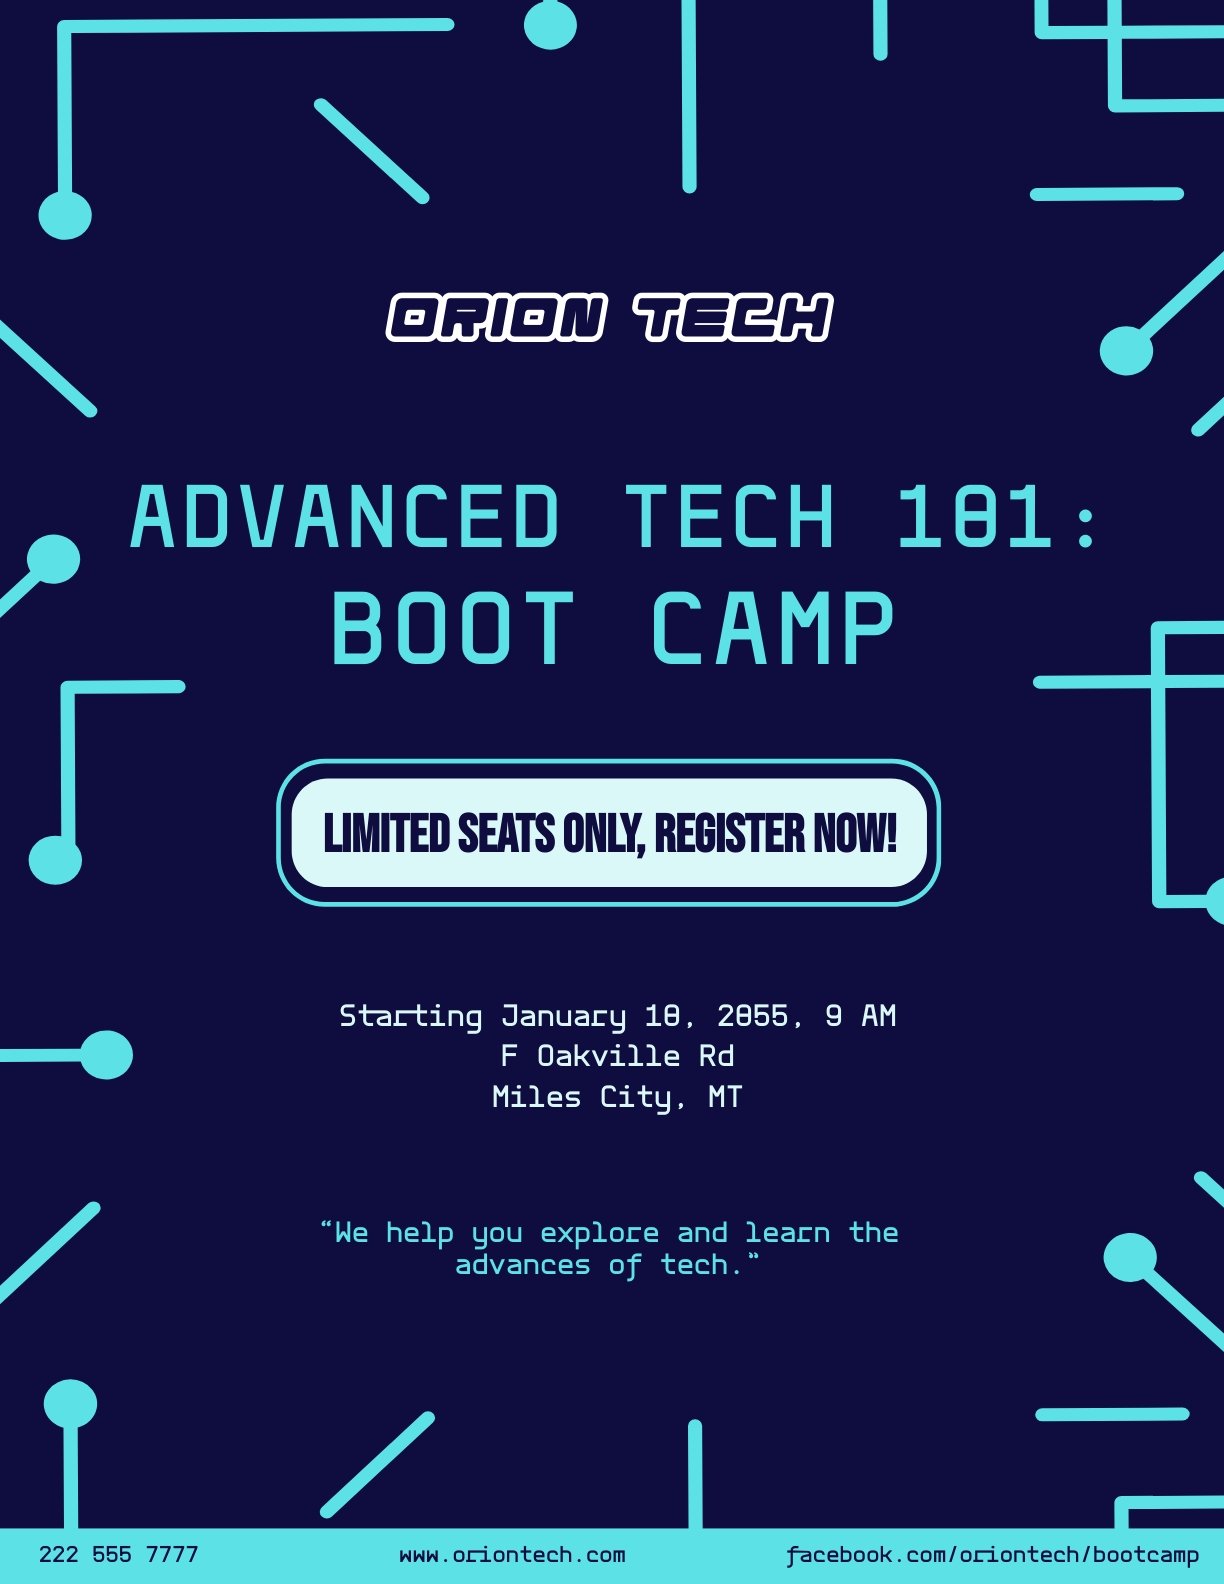 Free Indoor Boot Camp Flyer in Word, Google Docs, Illustrator, PSD, Apple Pages, Publisher